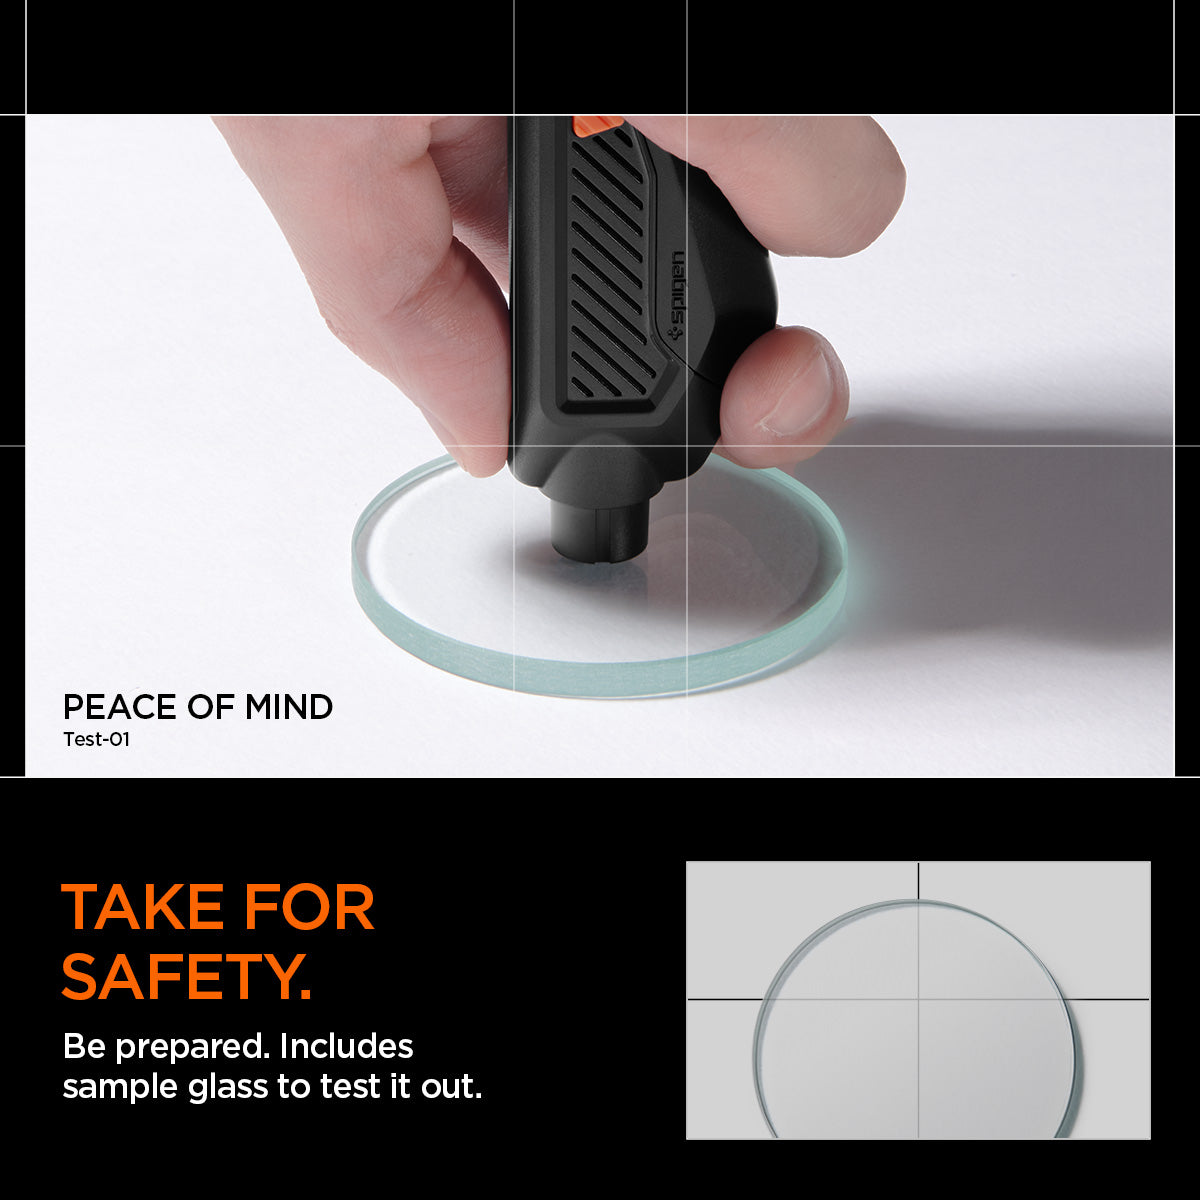 ACP06988 - Car Escape Tool in Black showing the peace of mind test-01. Take For Safety. Be prepared. Includes sample glass to test it out.